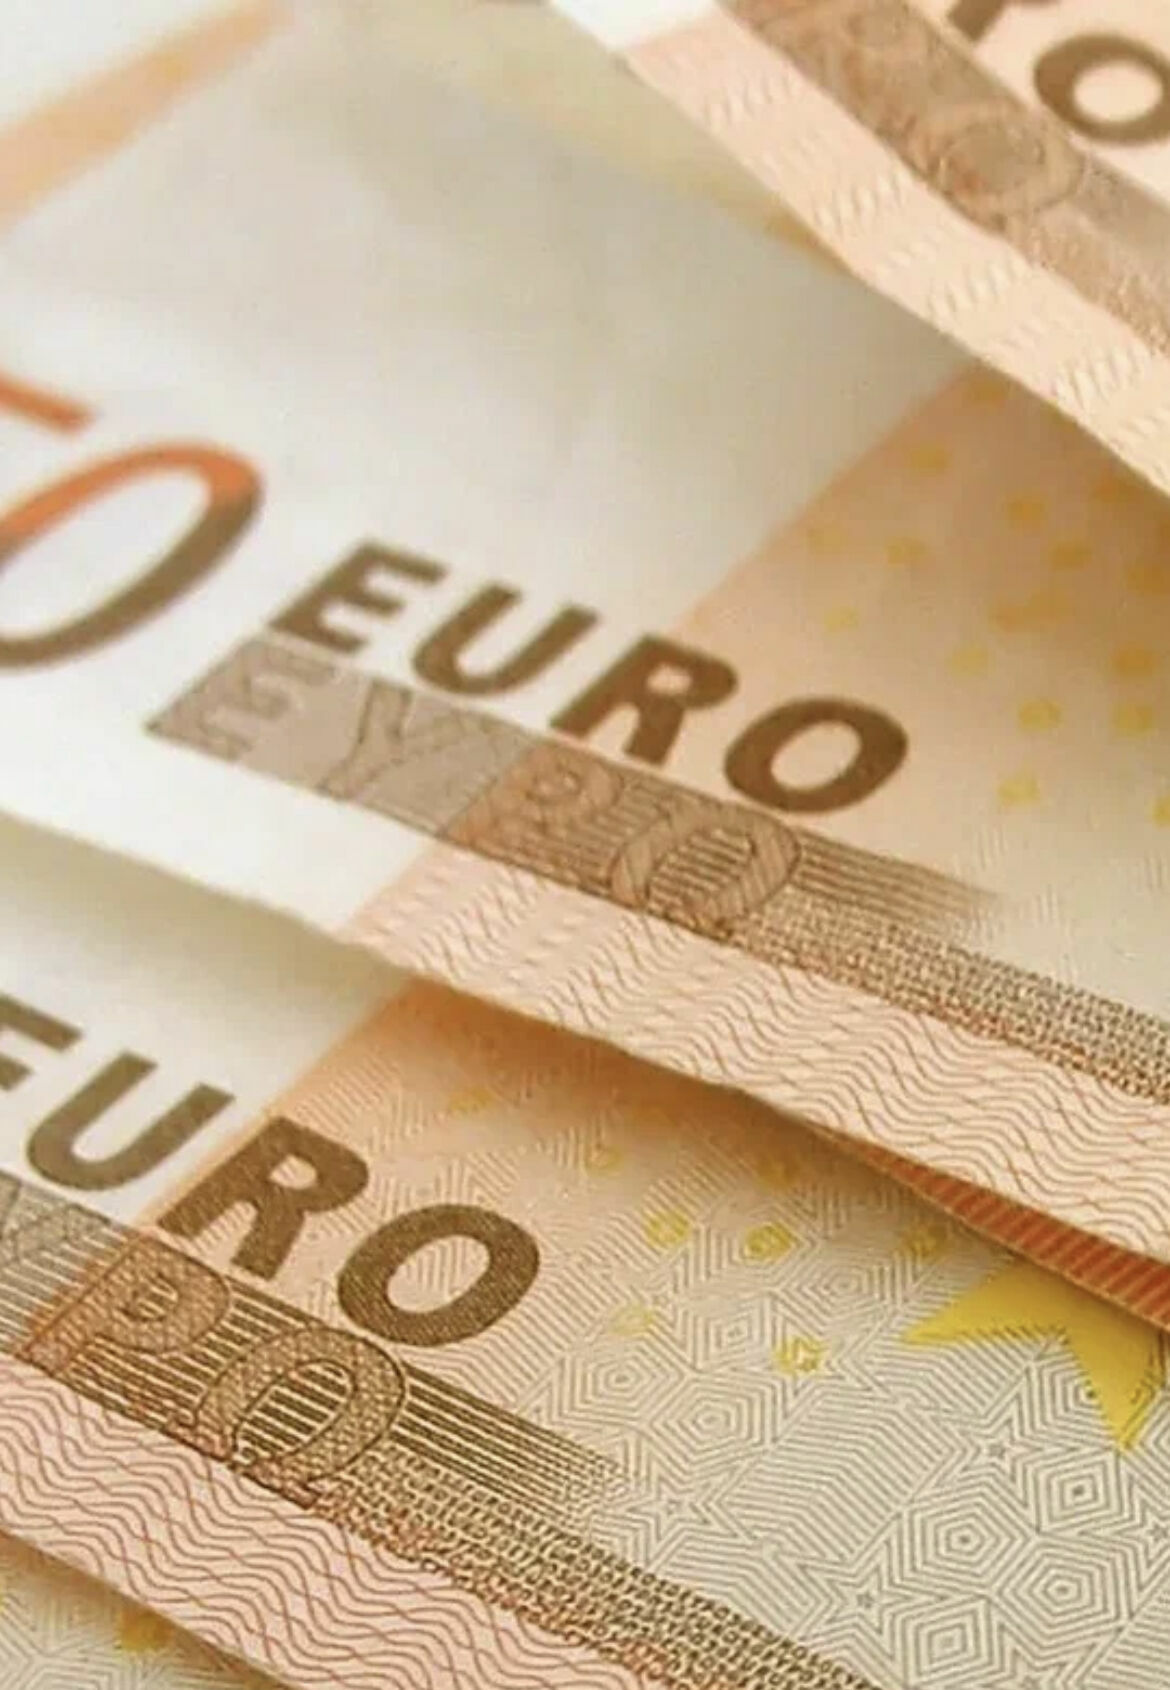 The euro lost to the dollar for the first time: trading began at parity, but then the EU currency gave up